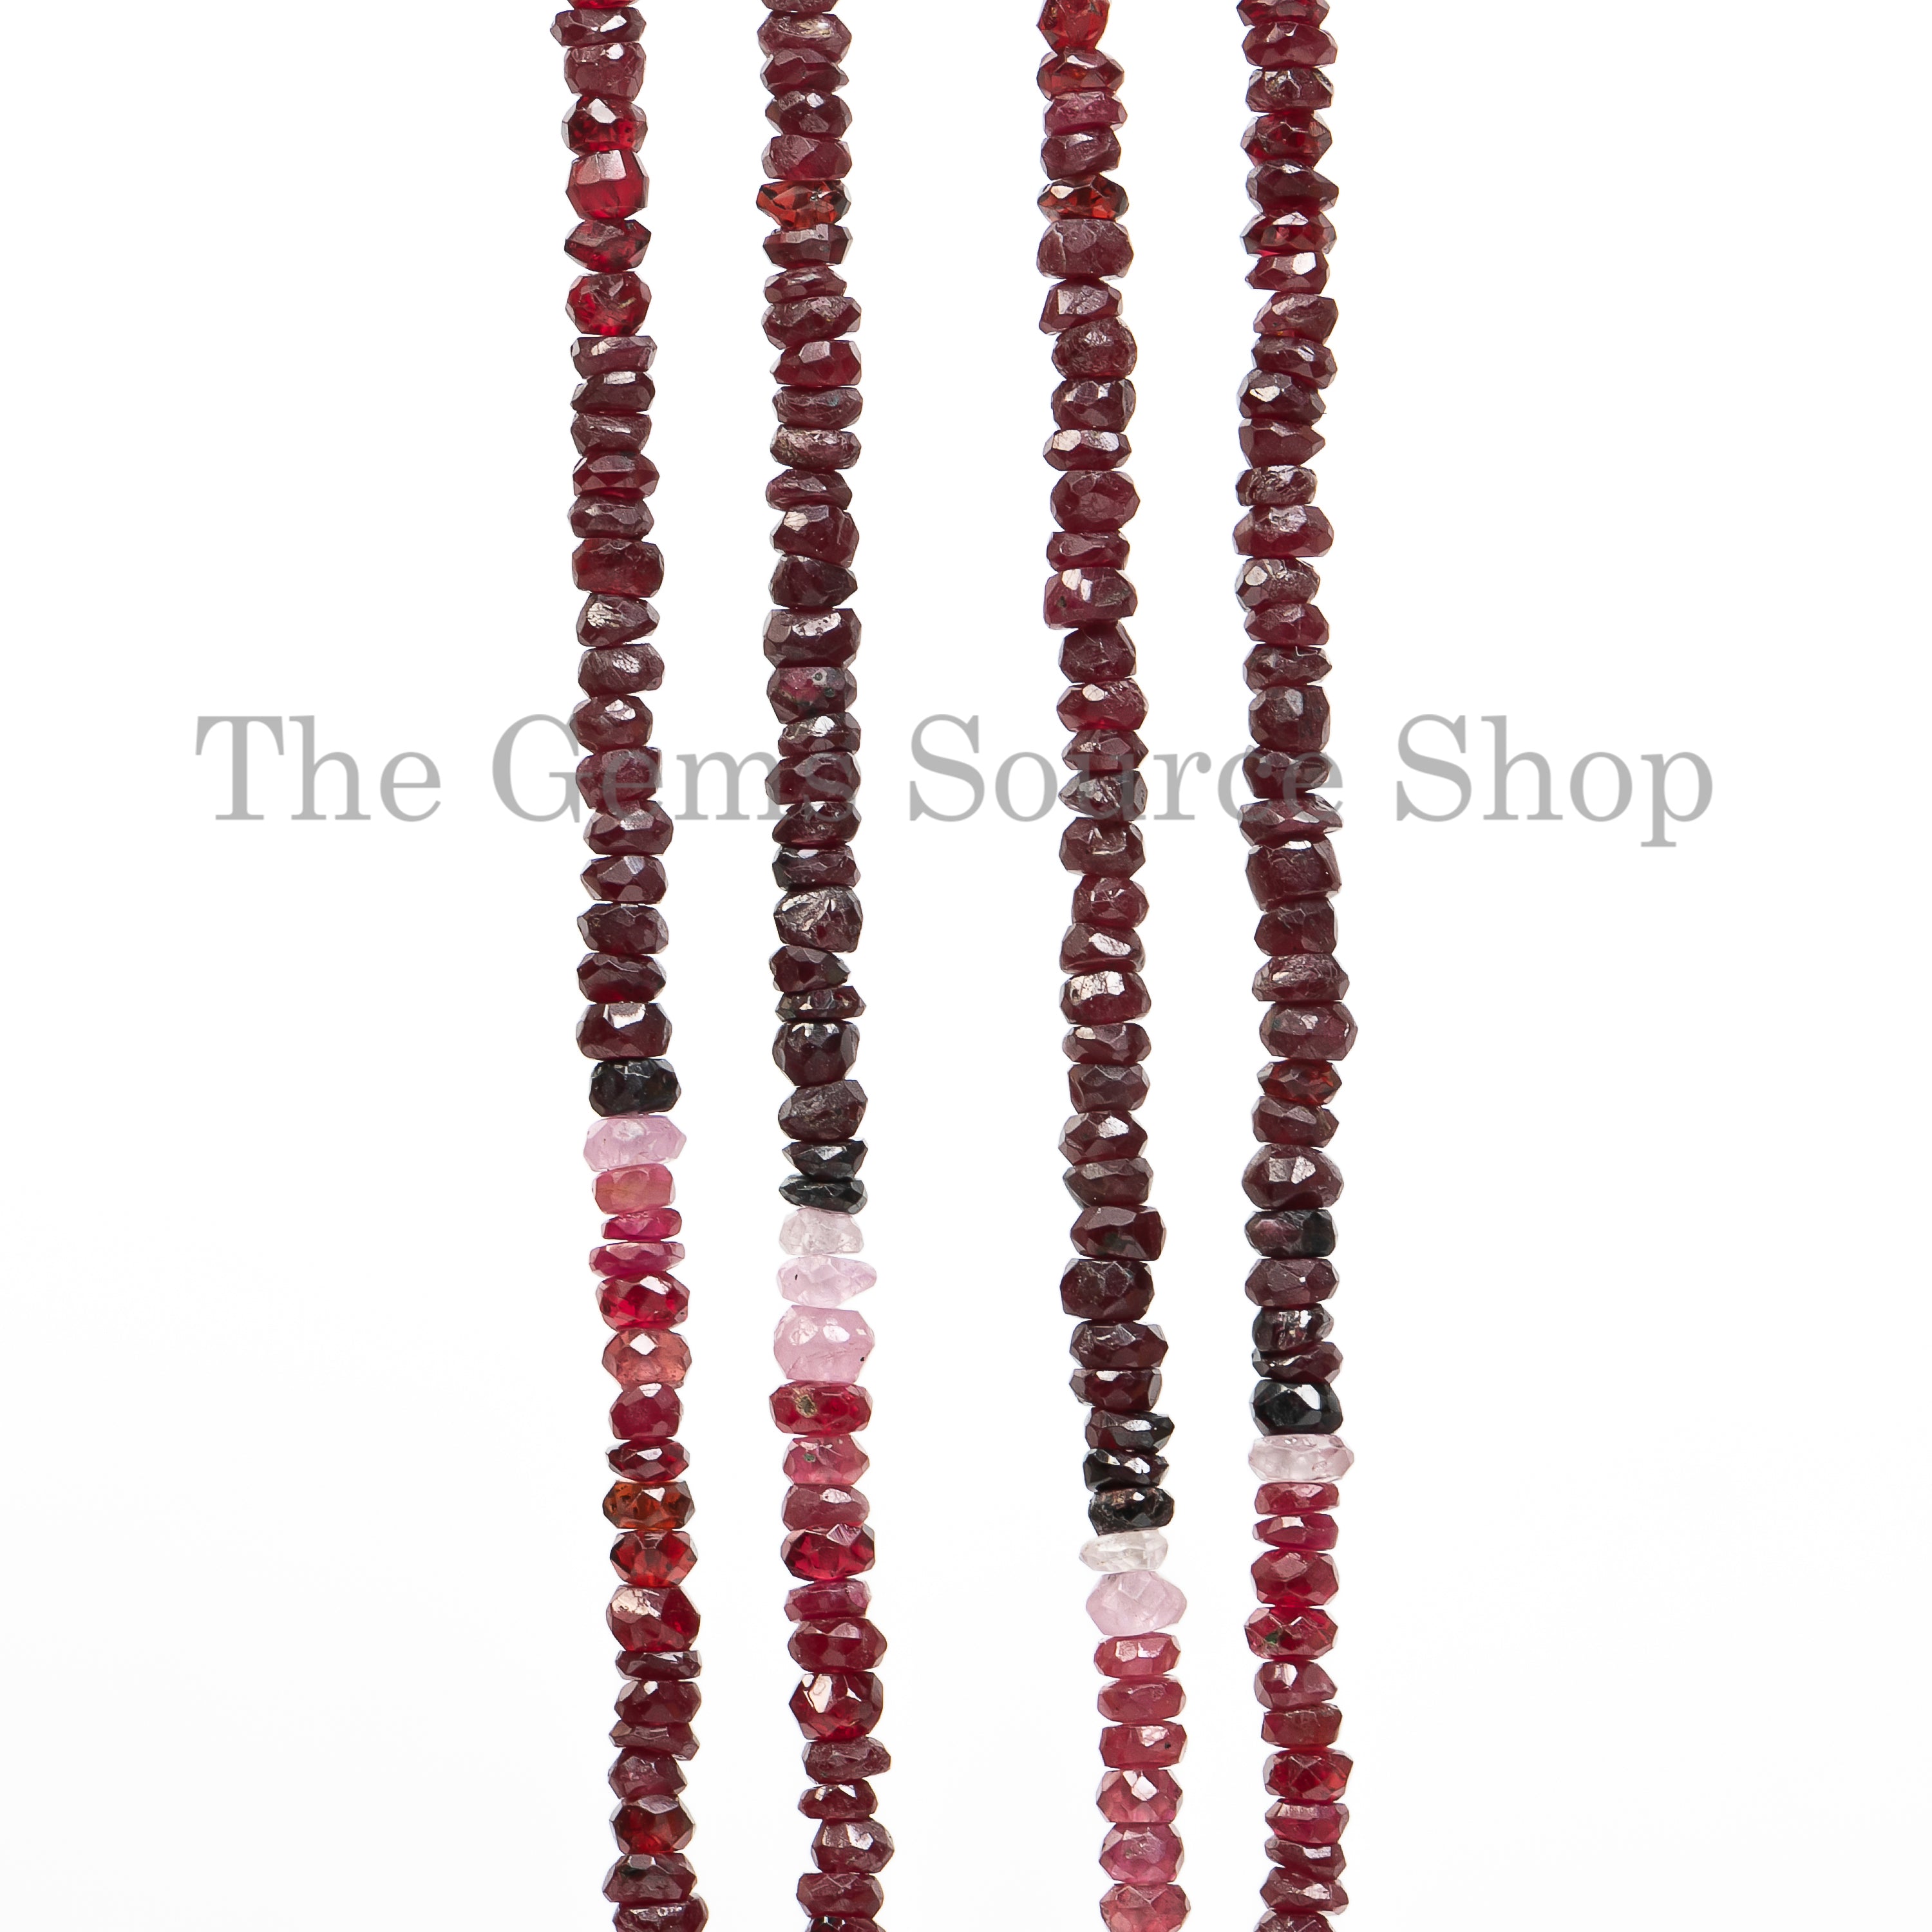 2.75-3 mm Shaded Ruby Faceted Rondelle Beads TGS-4734